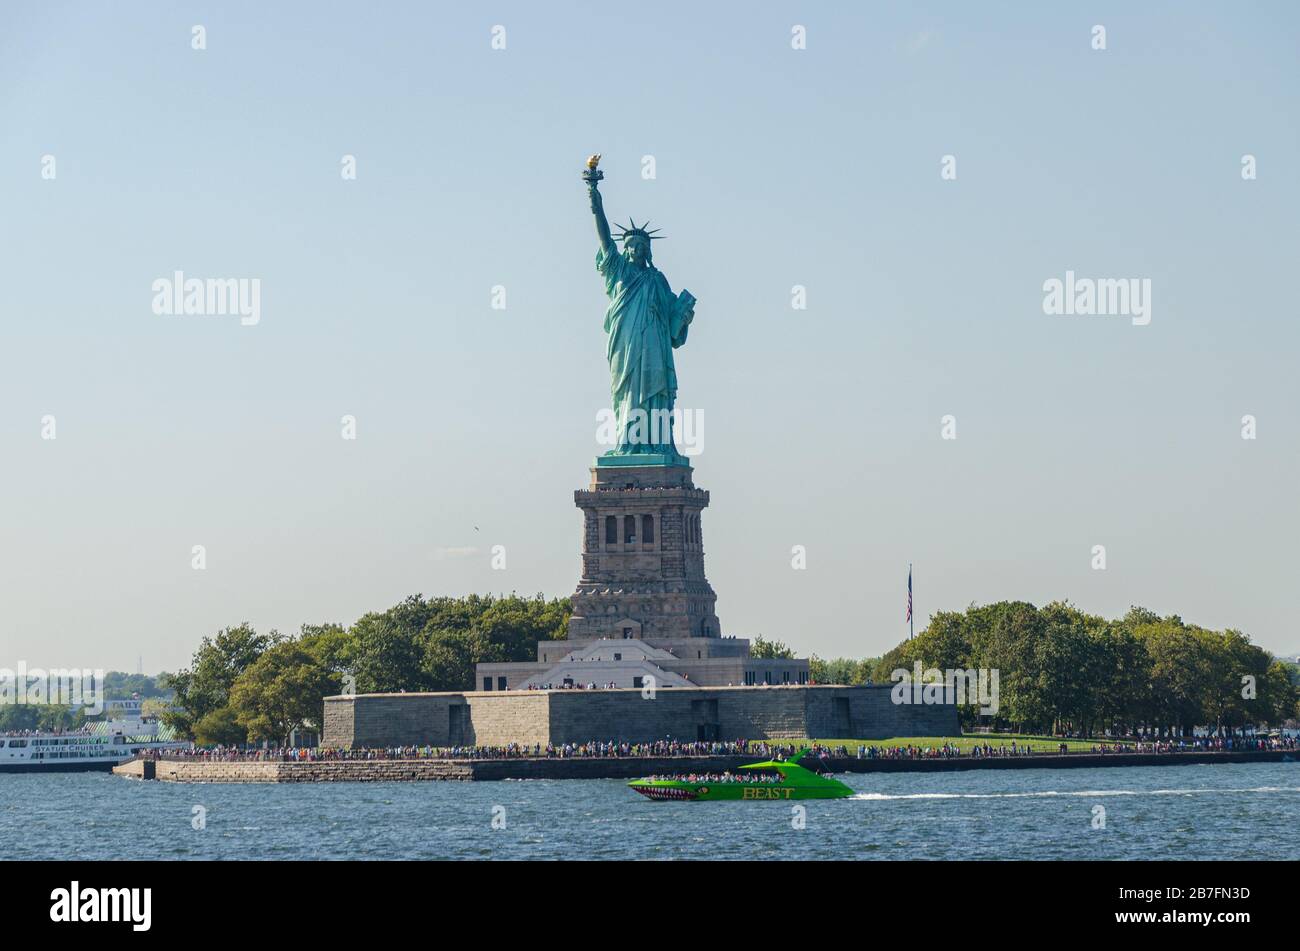 Amazing view of Statue of Liberty in New York NY USA Stock Photo